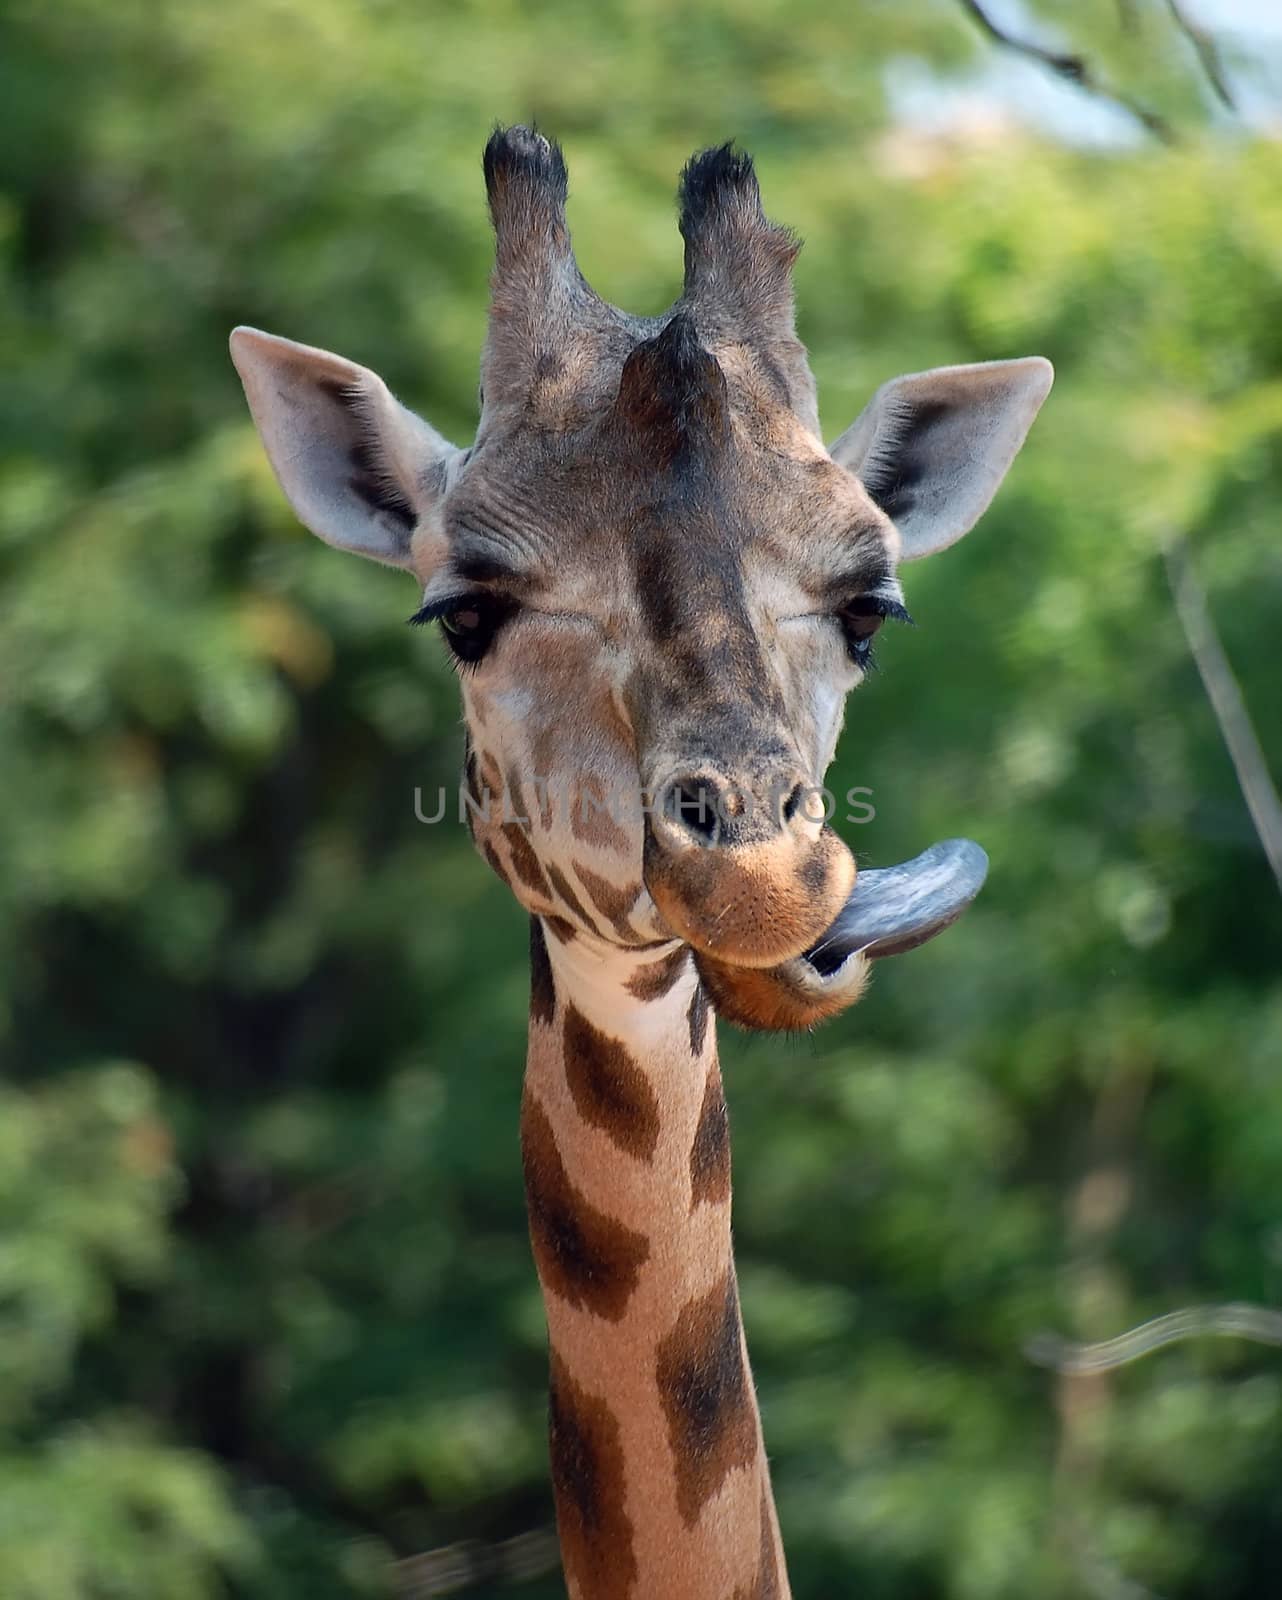 Close-up portrait of a Giraffe with her tongue out